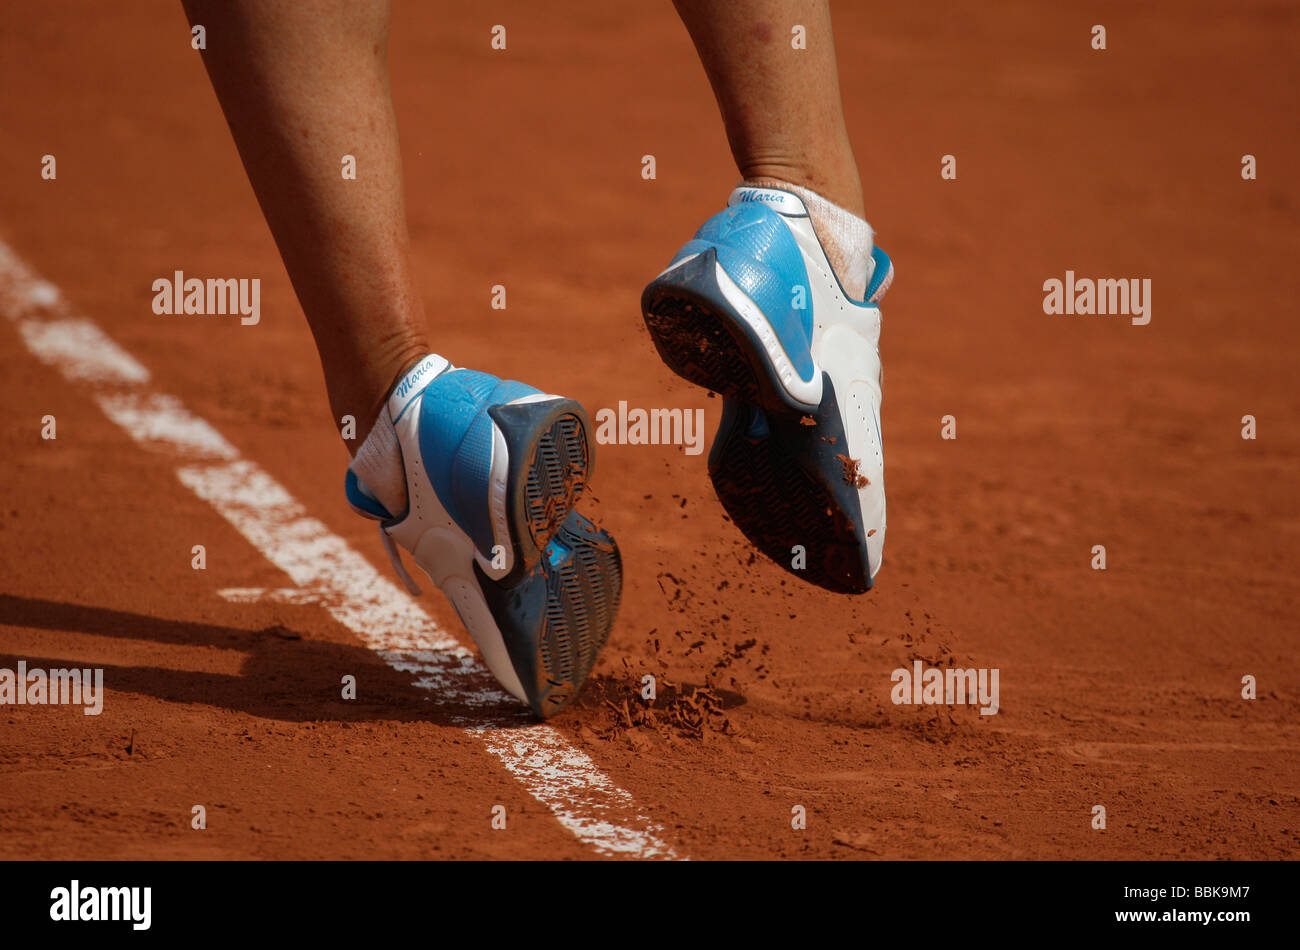 Tennis player Maria Sharapova's feet in her personalized shoes. Stock Photo